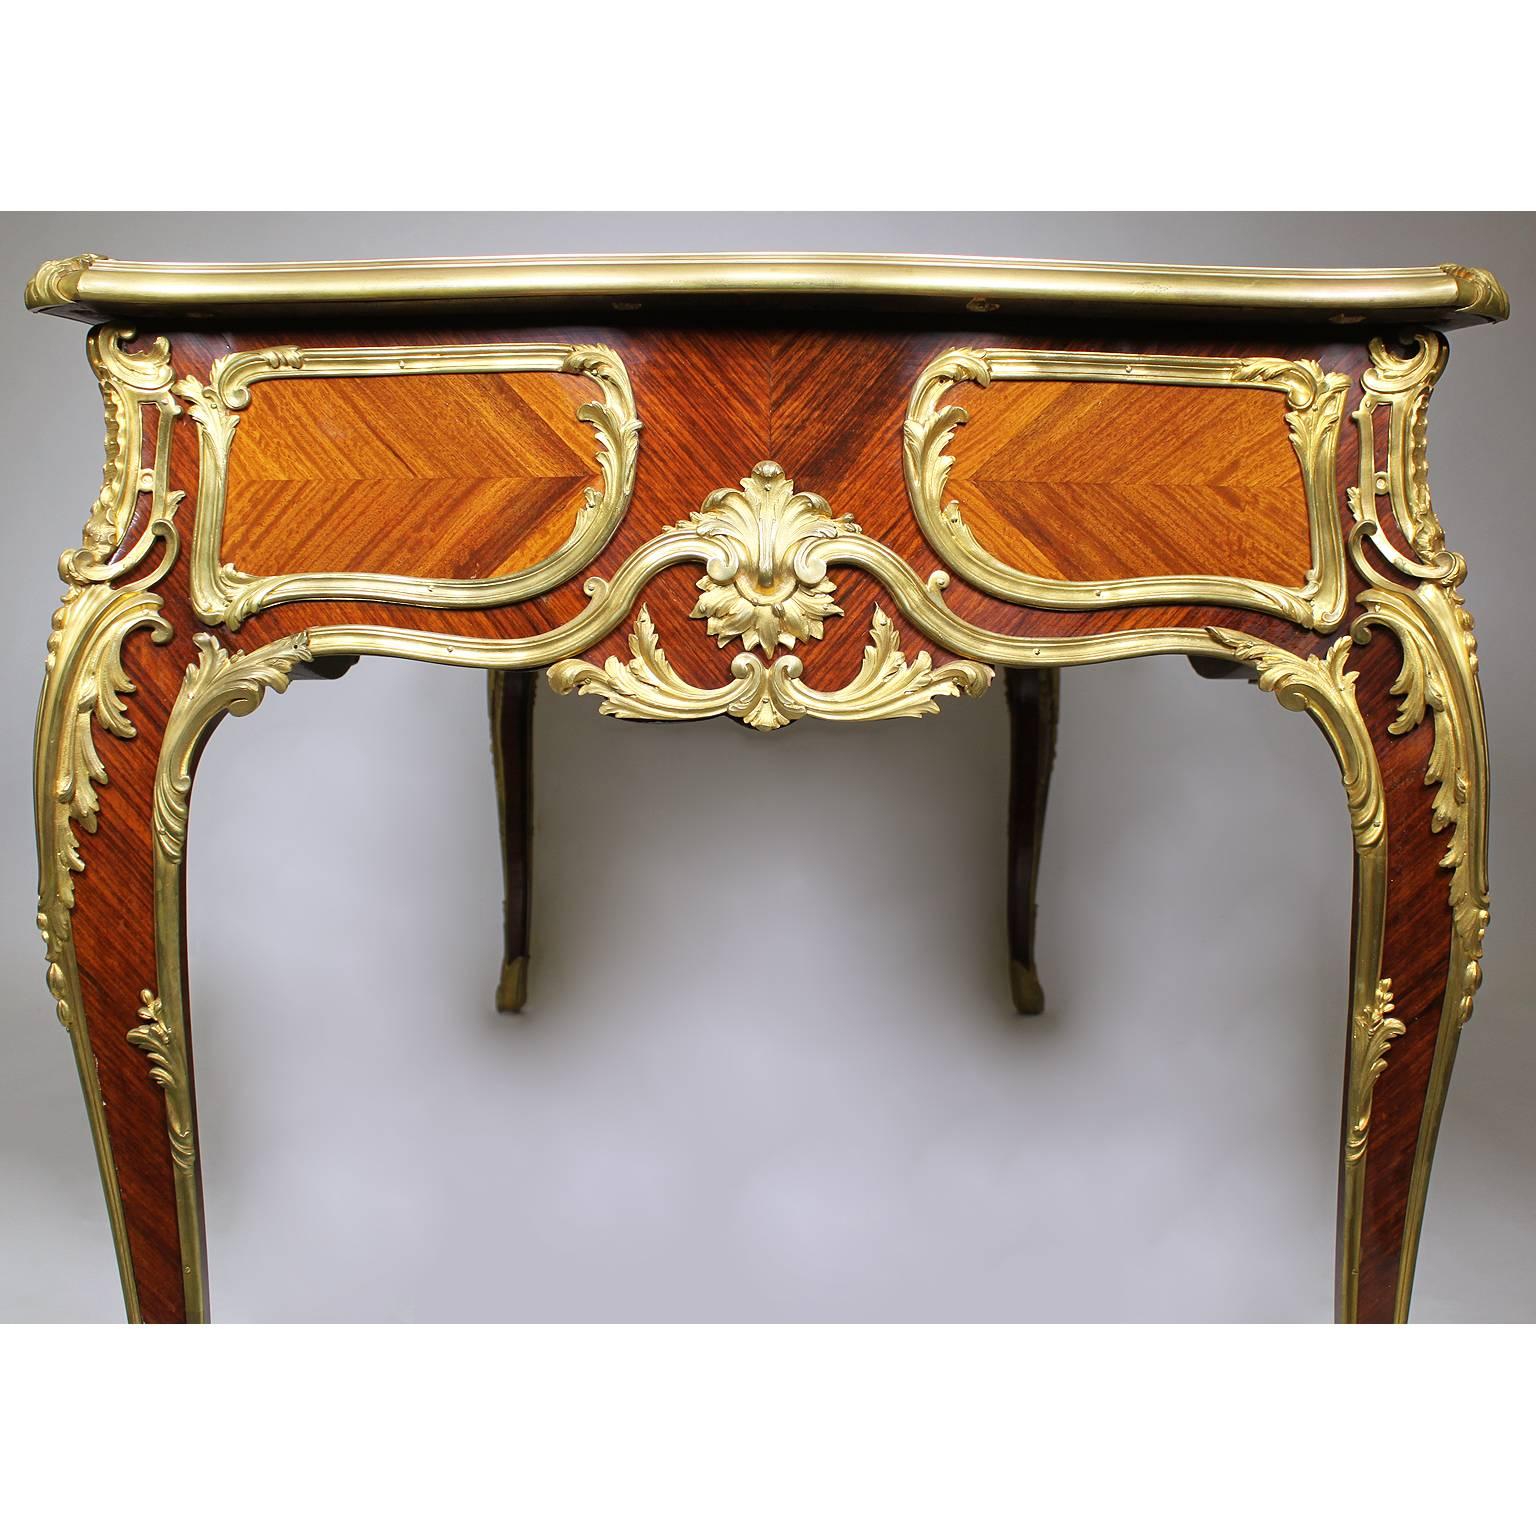 French 19th Century Louis XV Style Kingwood Gilt-Bronze Mounted Bureau Plat Desk In Good Condition For Sale In Los Angeles, CA